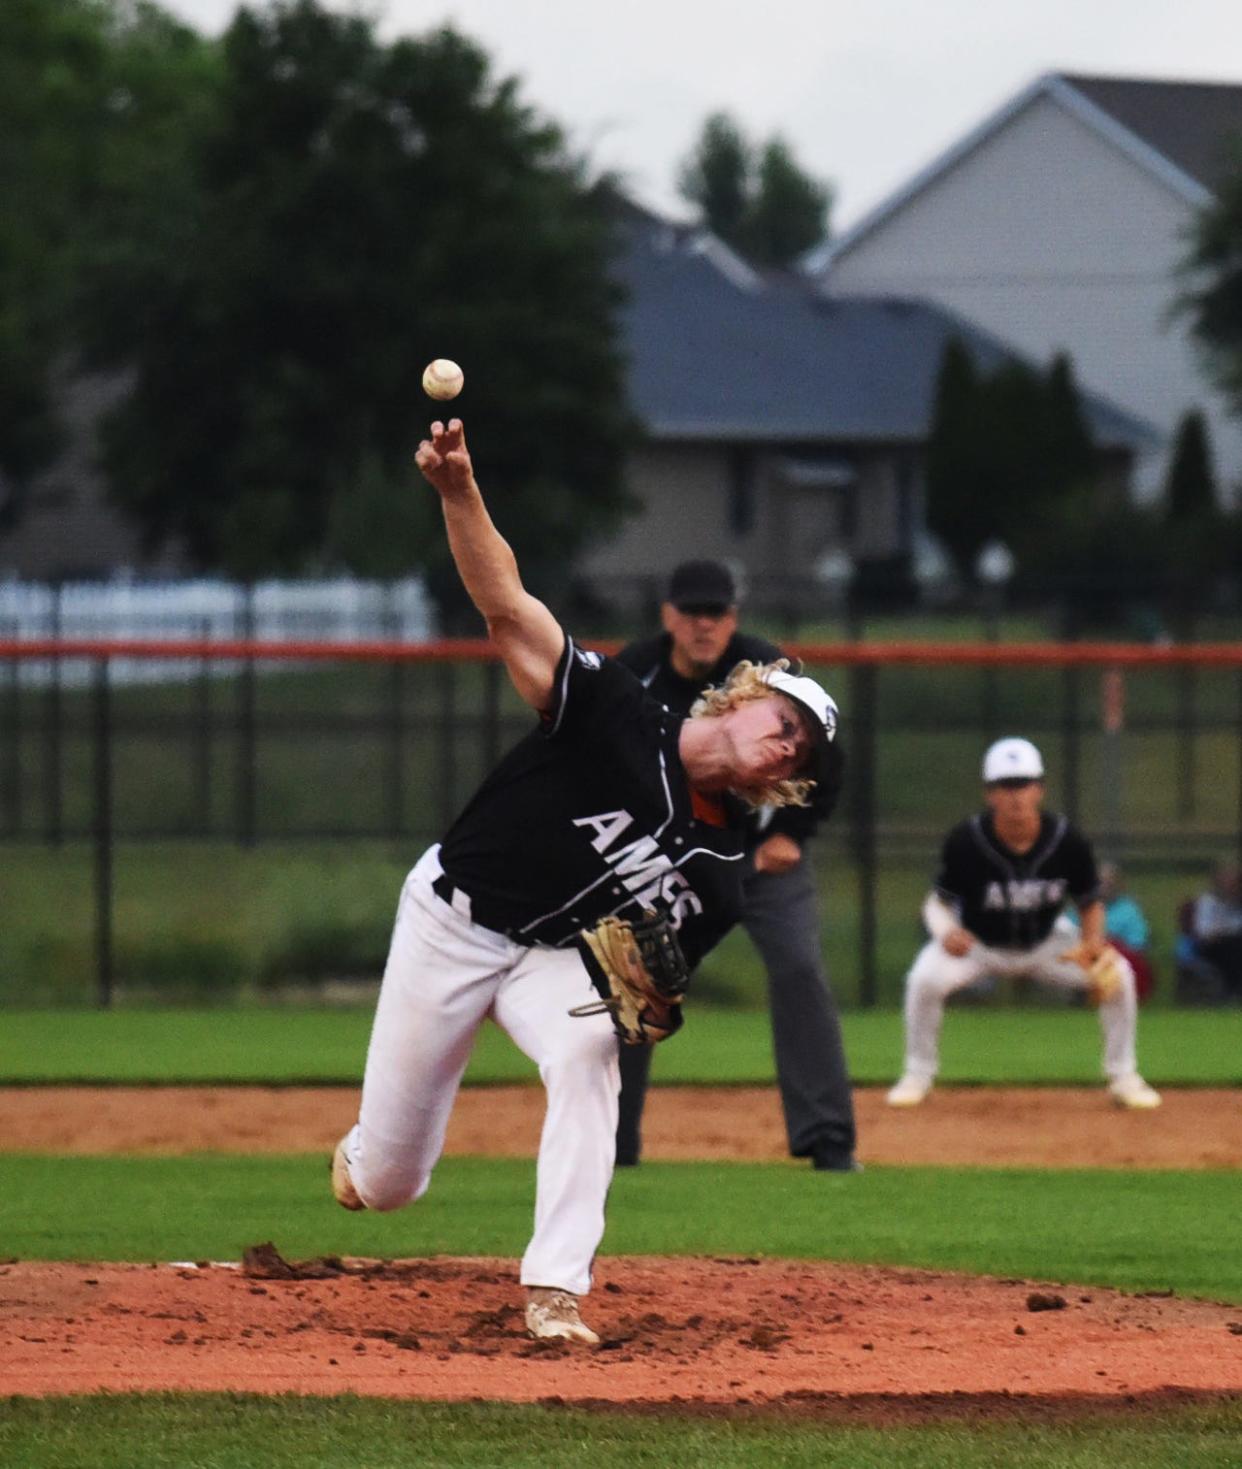 Ames senior and Iowa baseball commit Carter Geffre was a workhorse on the mound as an all-state pitcher for last year's Little Cyclone team.